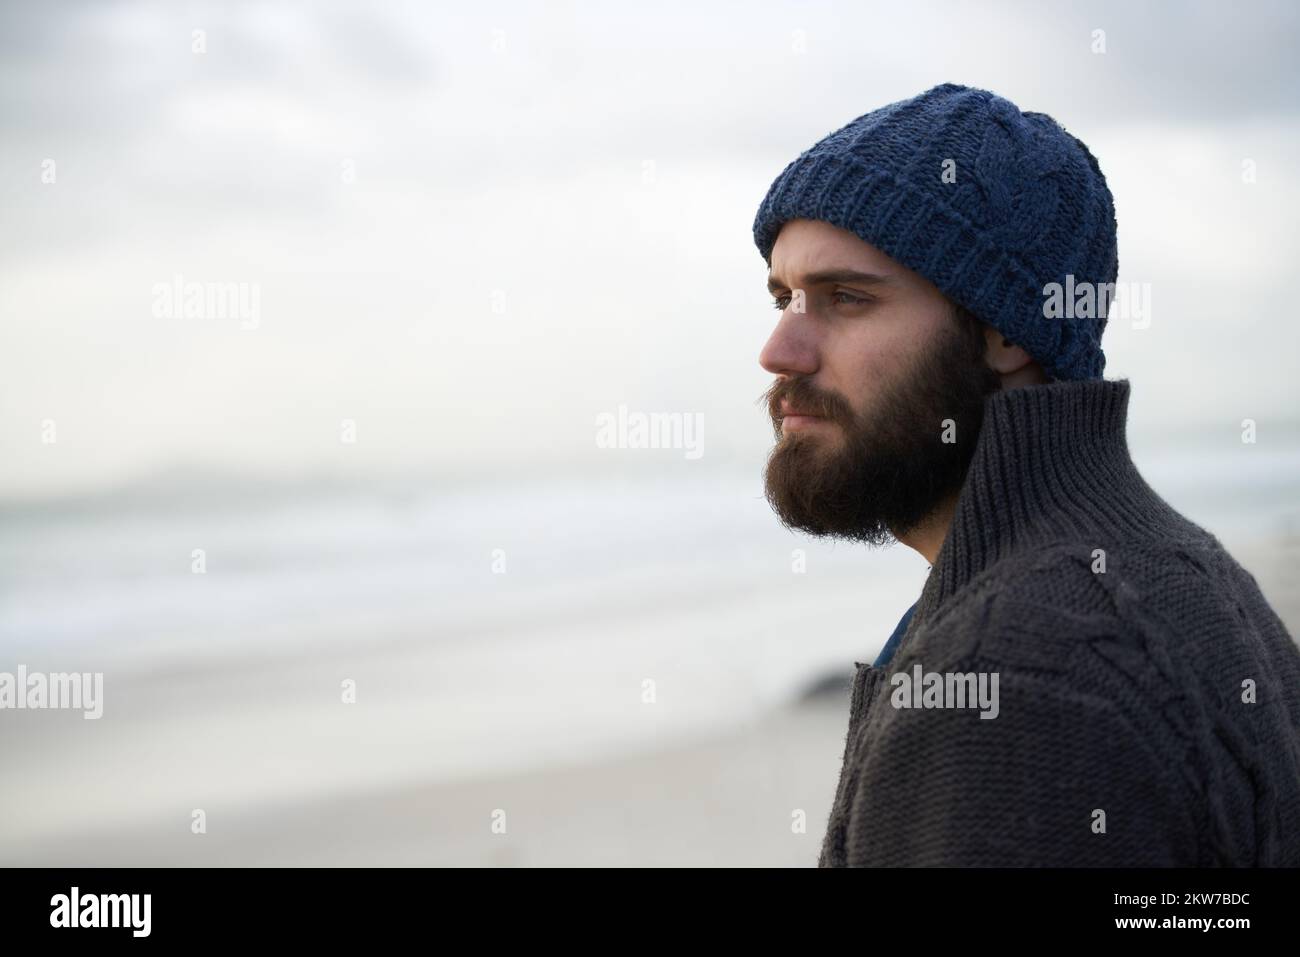 Early morning riser. a outdoorsy young man at the ocean. Stock Photo